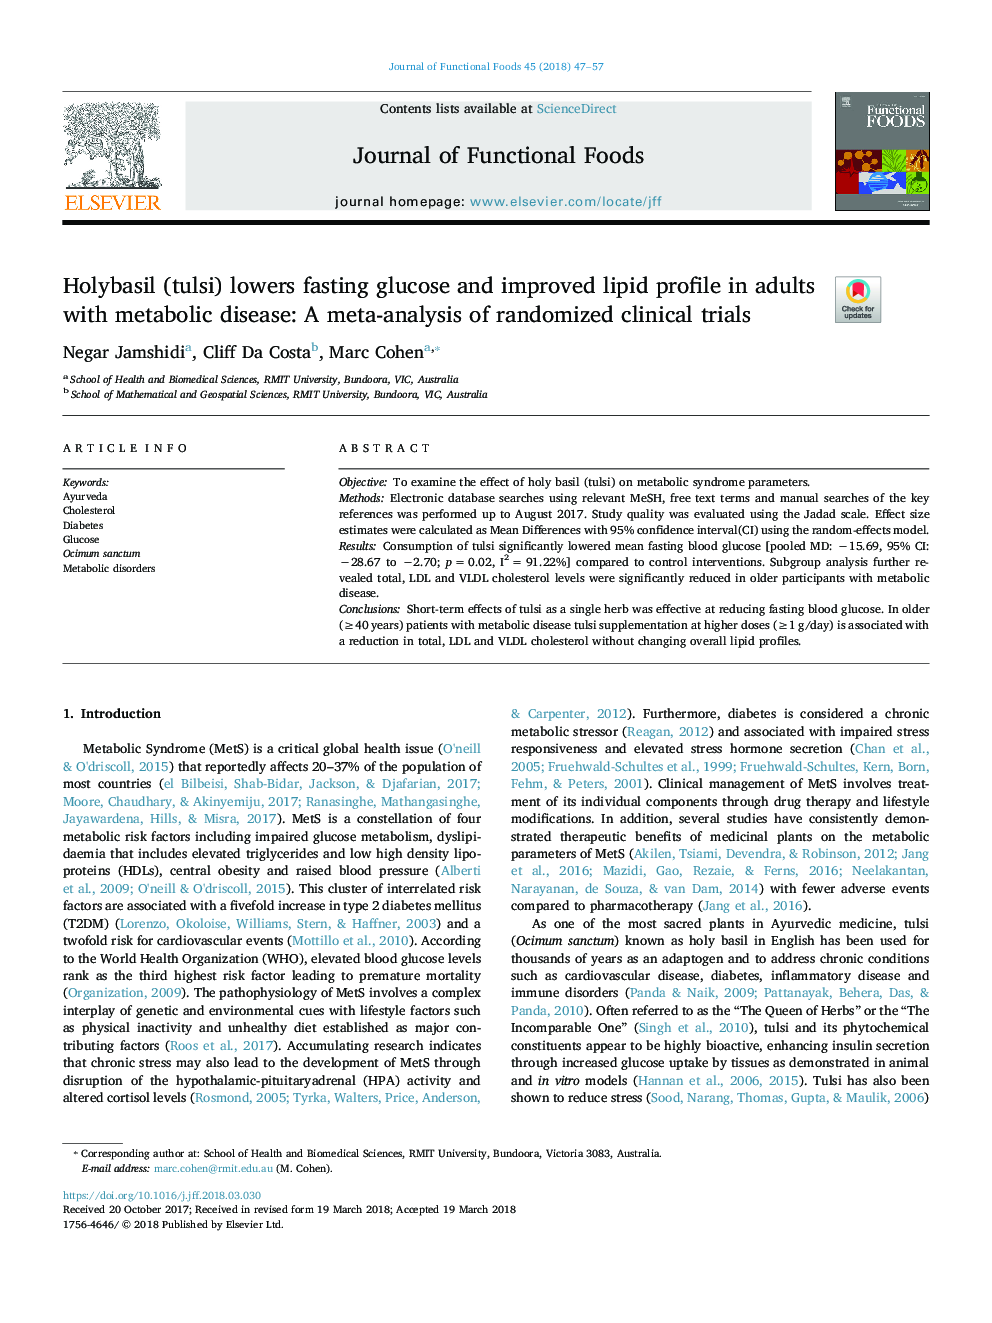 Holybasil (tulsi) lowers fasting glucose and improves lipid profile in adults with metabolic disease: A meta-analysis of randomized clinical trials